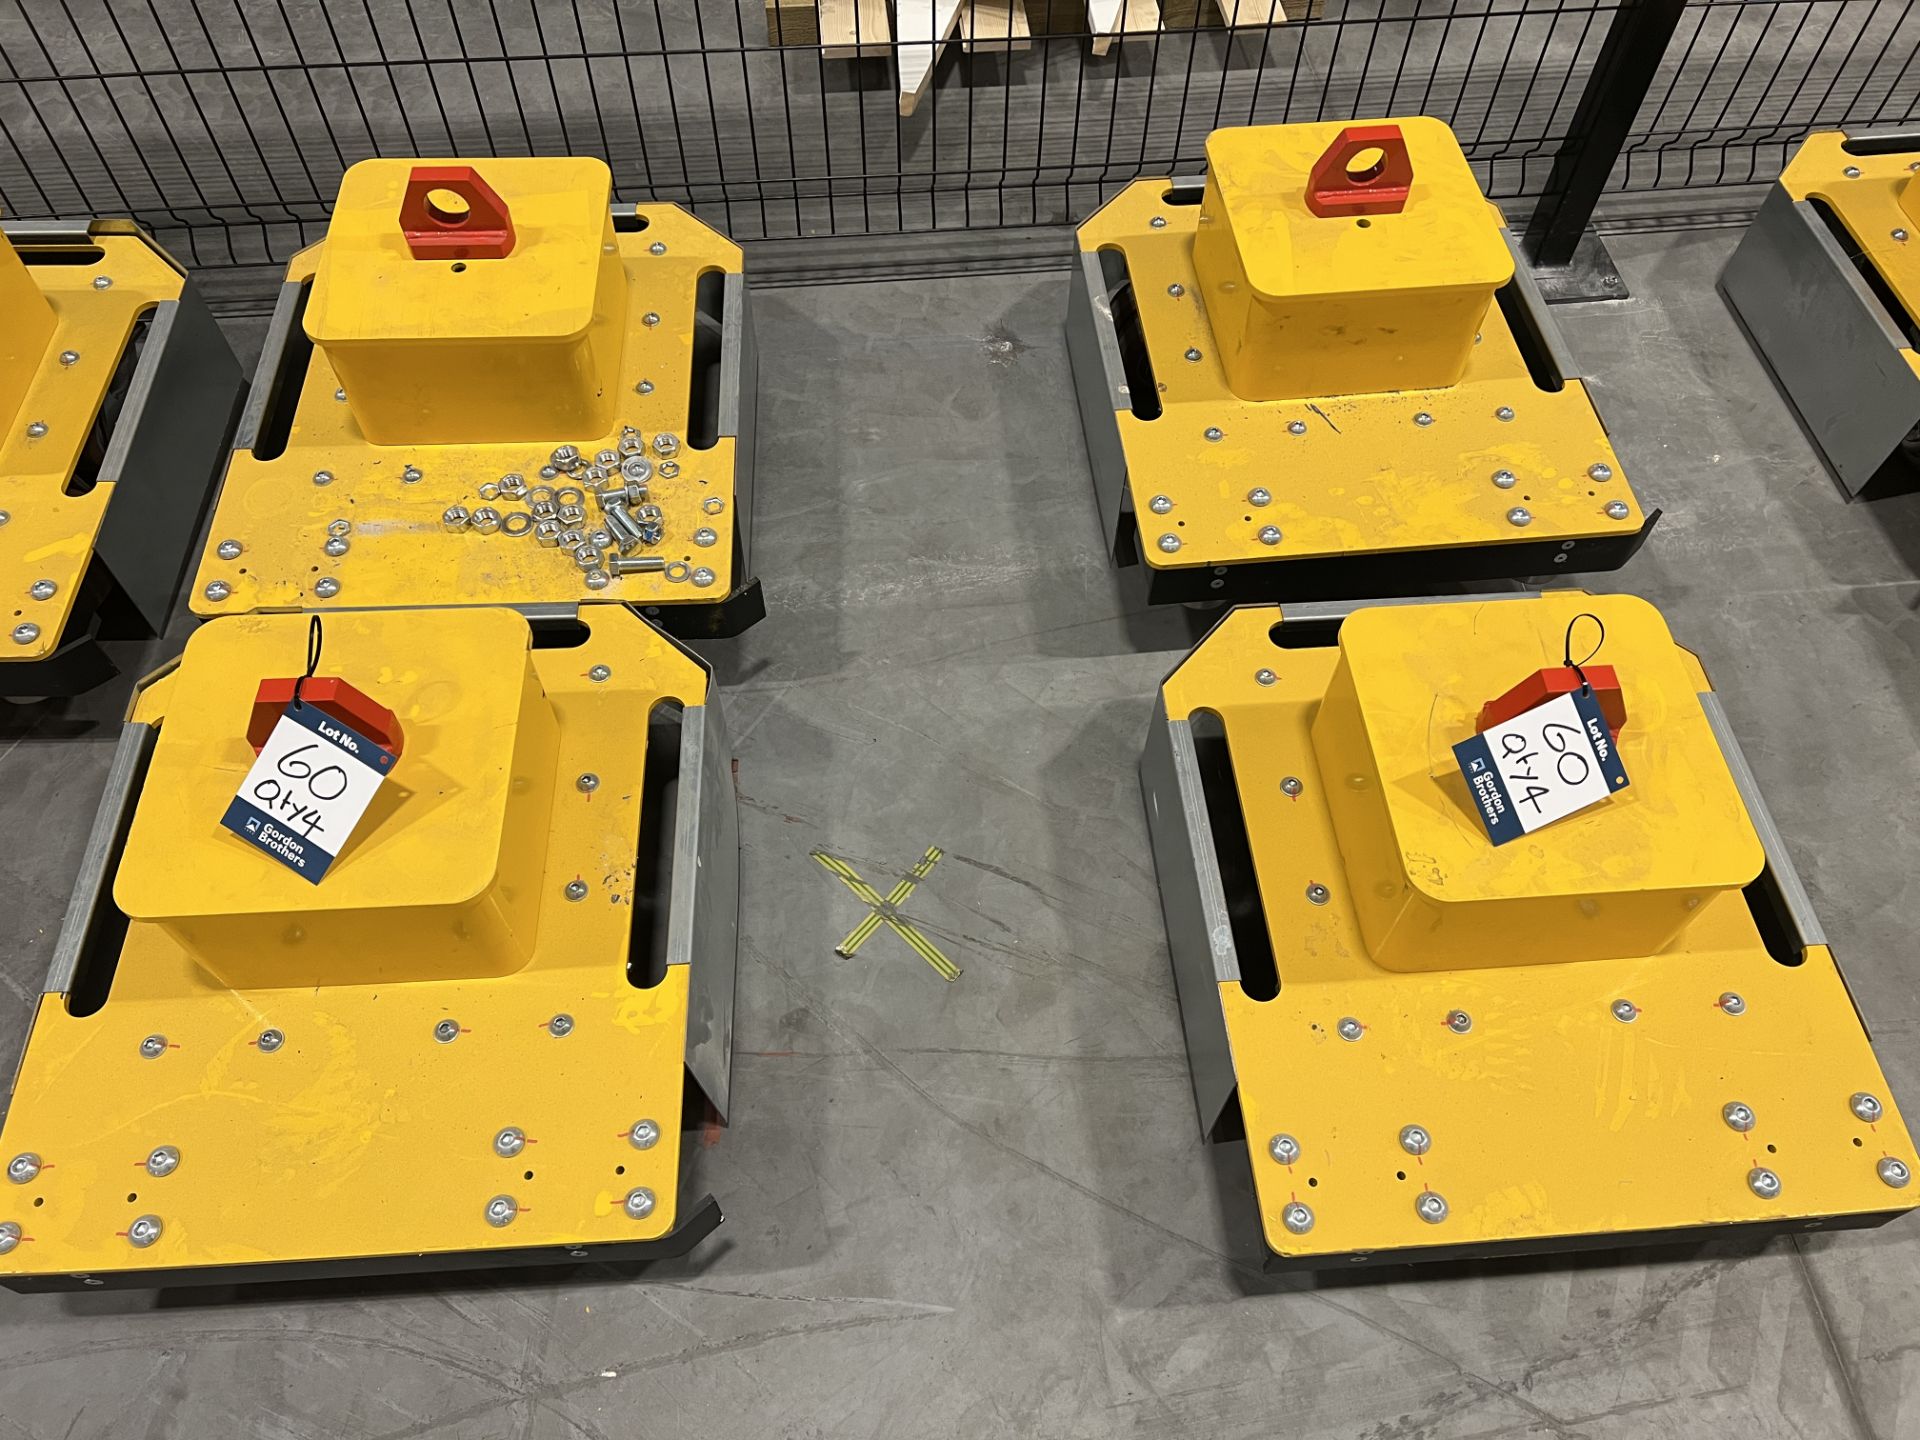 Heavy duty skates (2021) from lot 21 the Tracoinsa Systems UK conveying system this lot will - Image 2 of 3